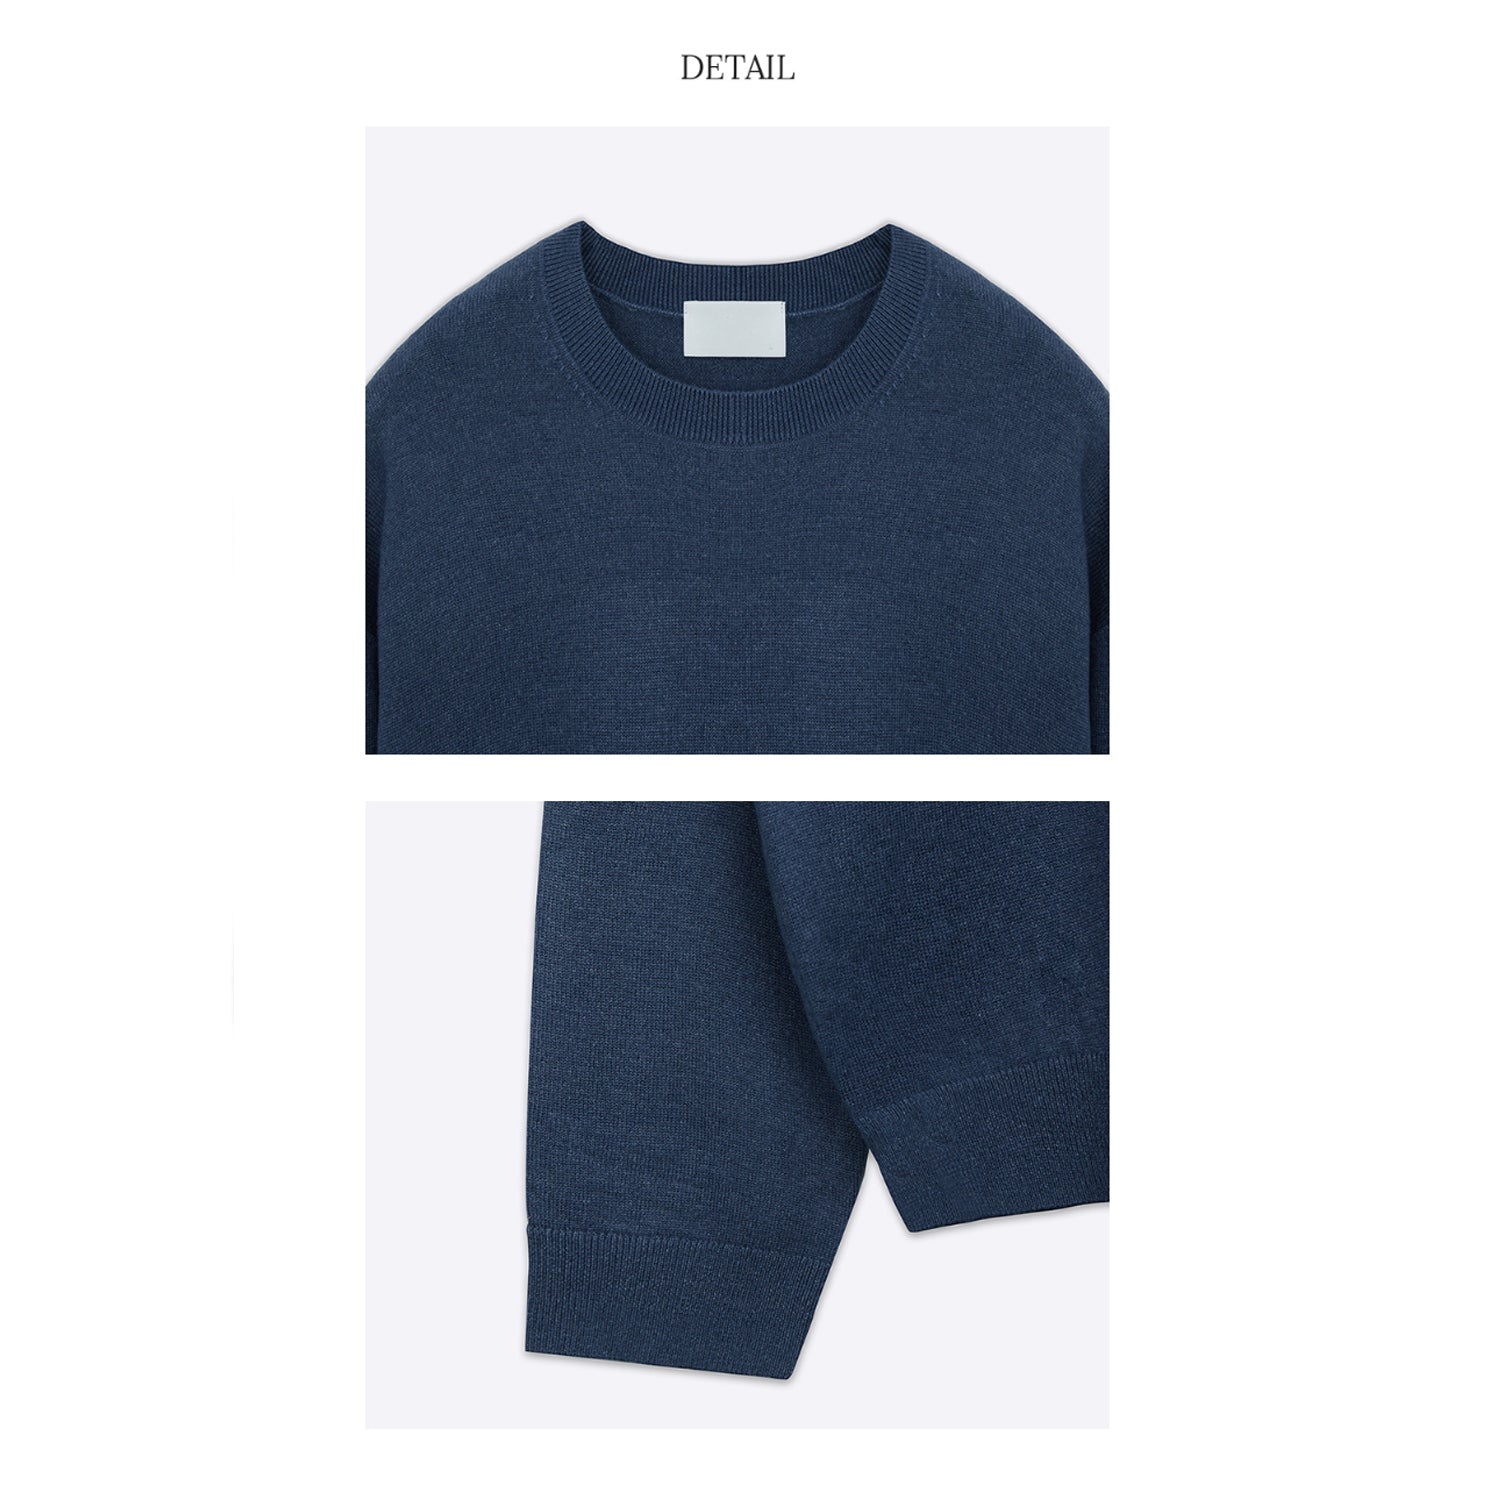 NEW COLOR BASIC ROUND KNIT